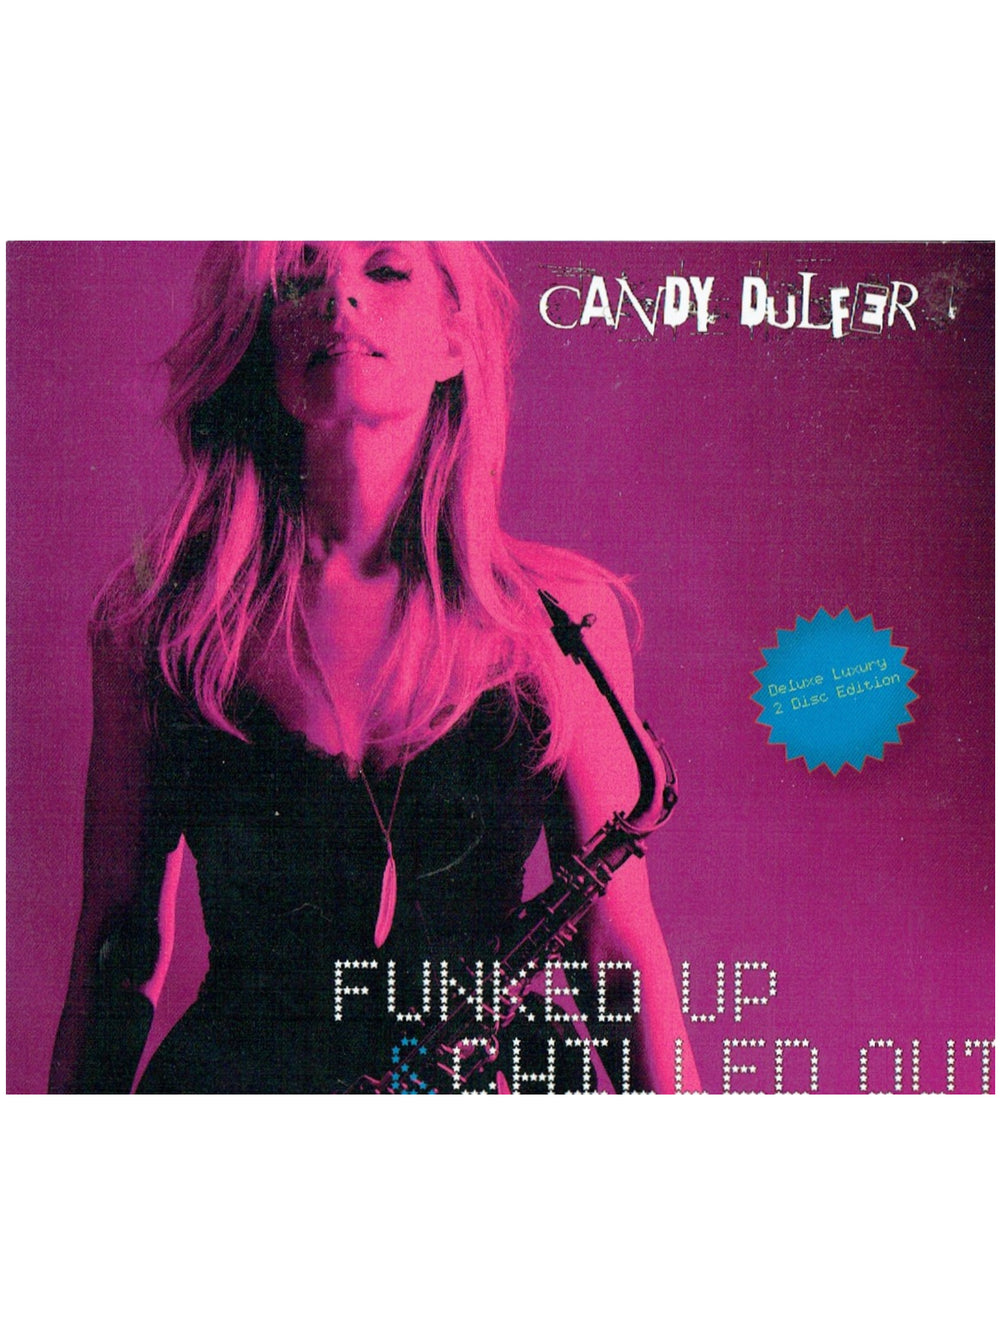 Prince – Candy Dulfer Funked Up Chilled Out Deluxe 2 CD Album EU 2009 Release Prince